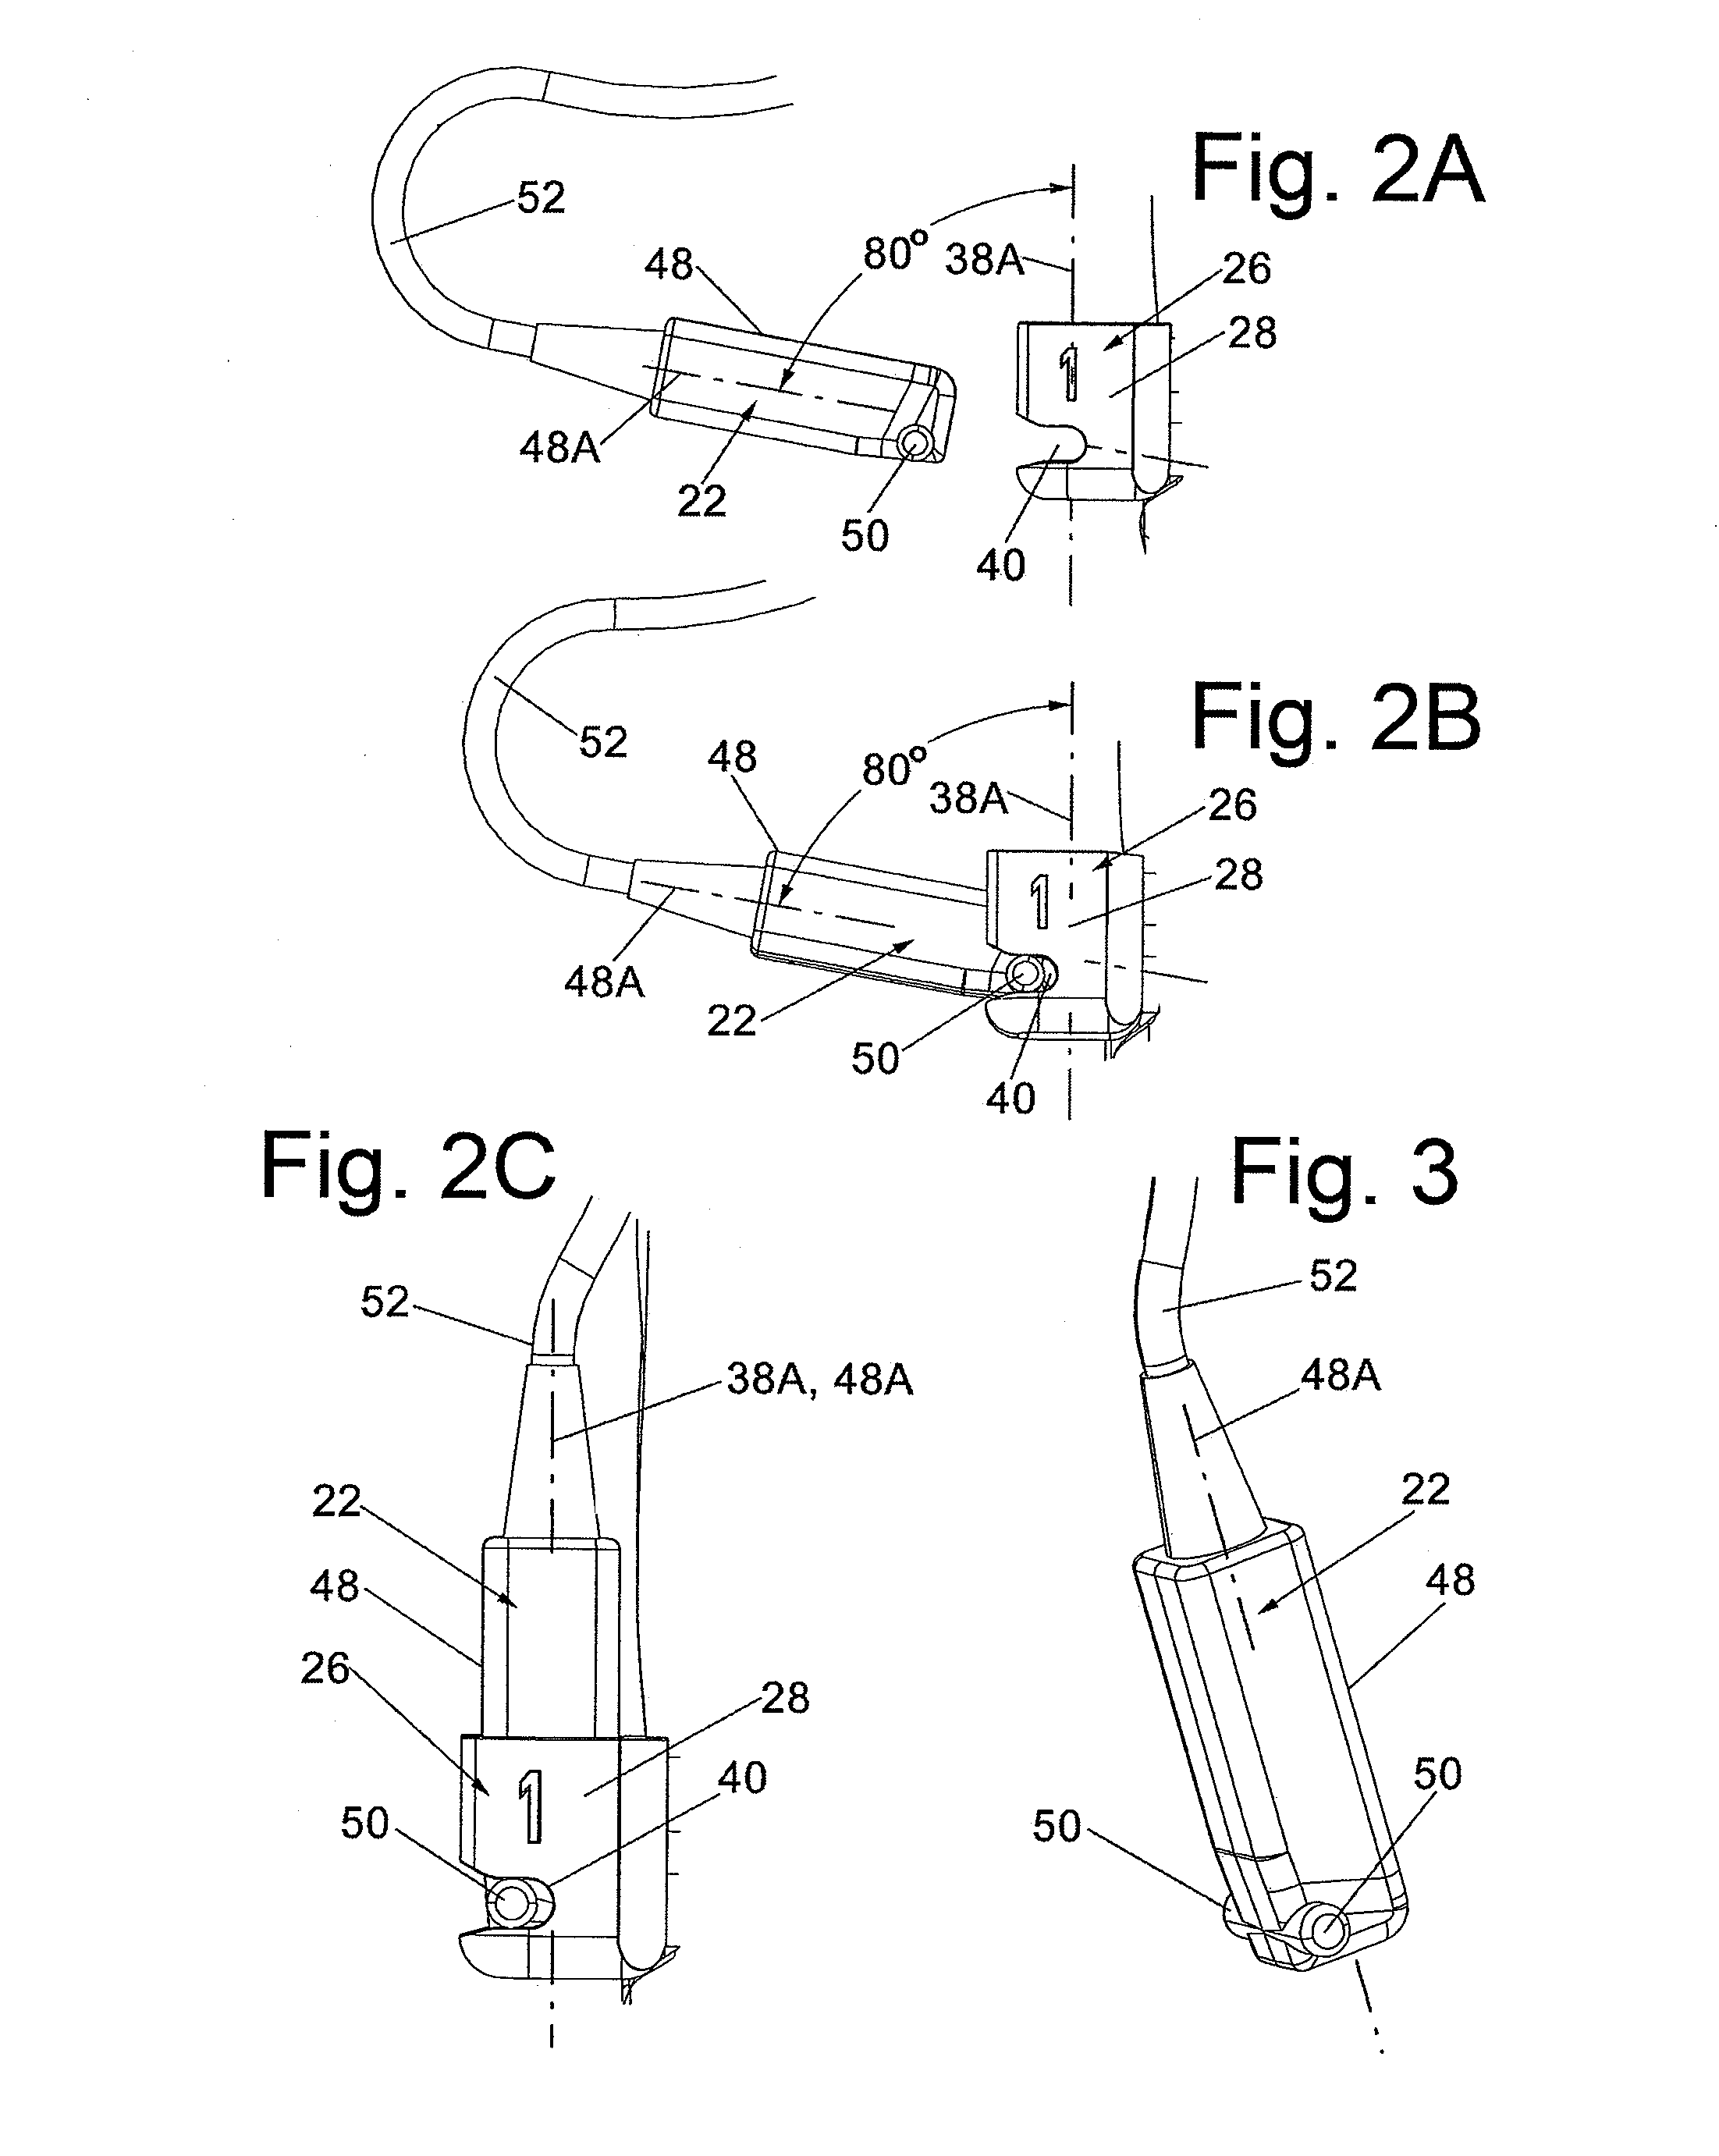 Bracket for mounting at least one position detecting sensor on an ultrasonic probe